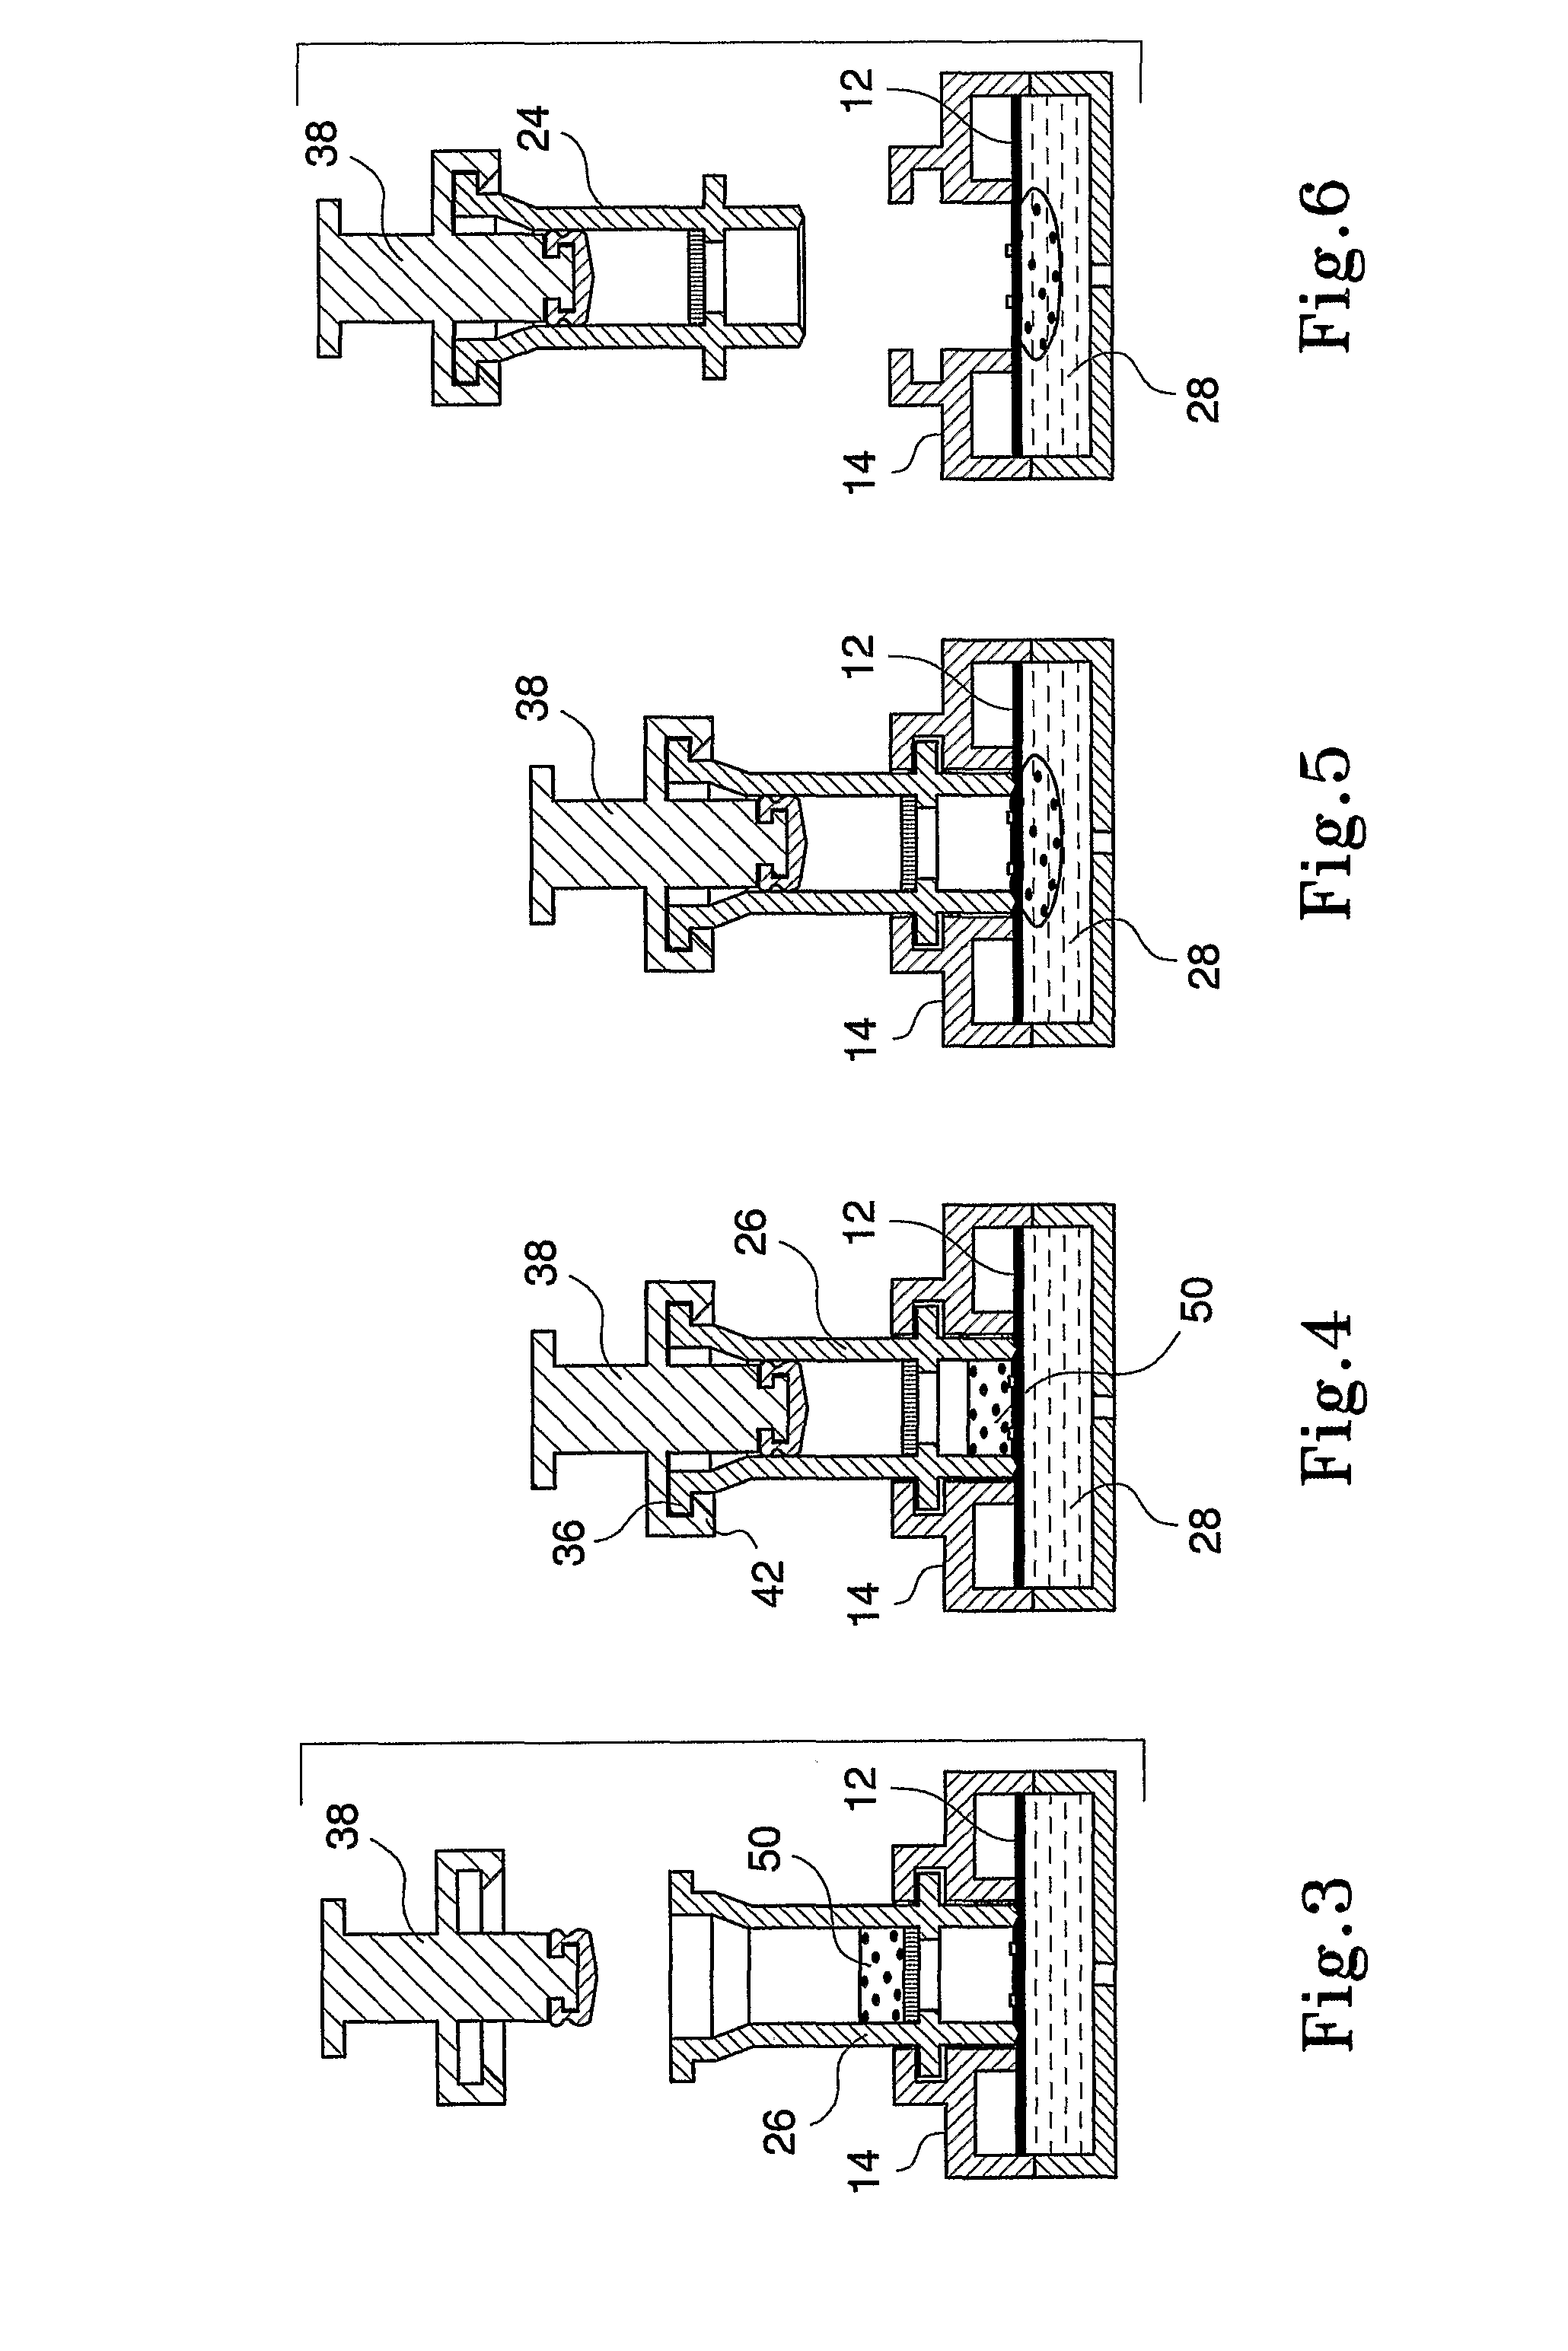 Diagnostic Testing Process and Apparatus Incorporating Controlled Sample Flow